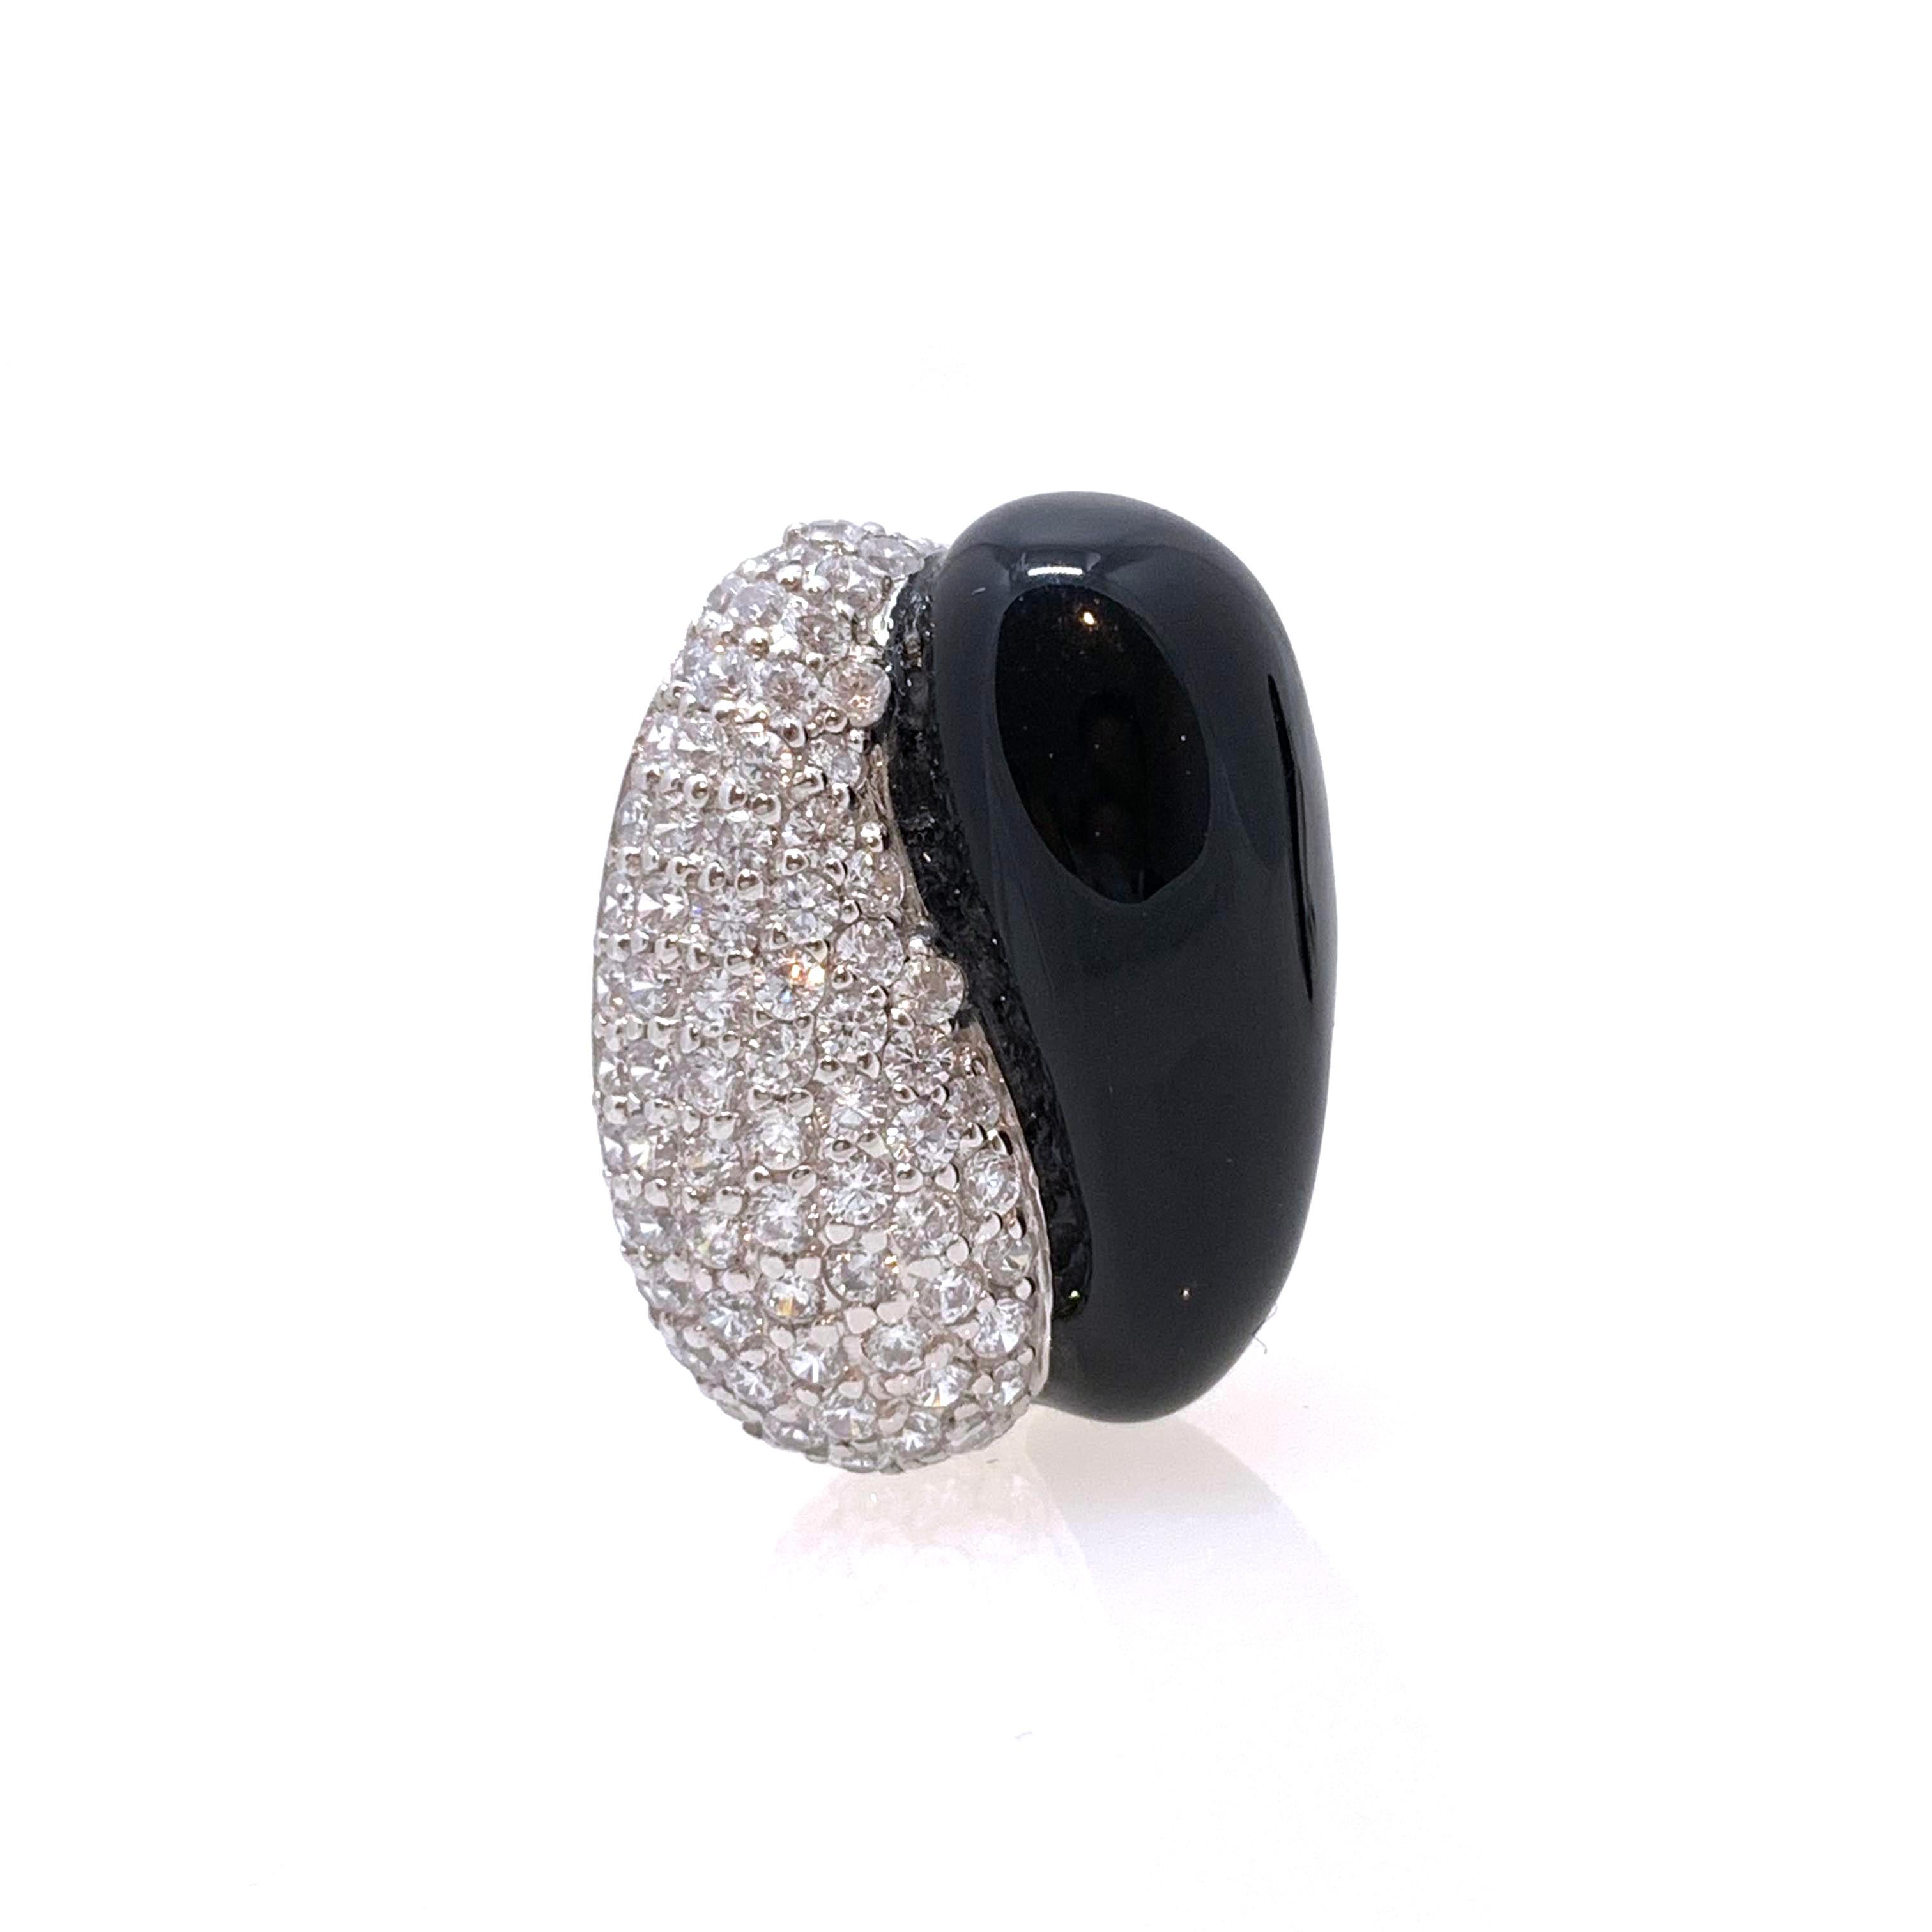 Stunning Half Black Enamel Half Pave Simulated Diamond Clip-on Earrings

These classic and sophisticate-style earrings feature over 160pcs of round simulated diamond cz handset in platinum rhodium plated sterling silver and layered over with